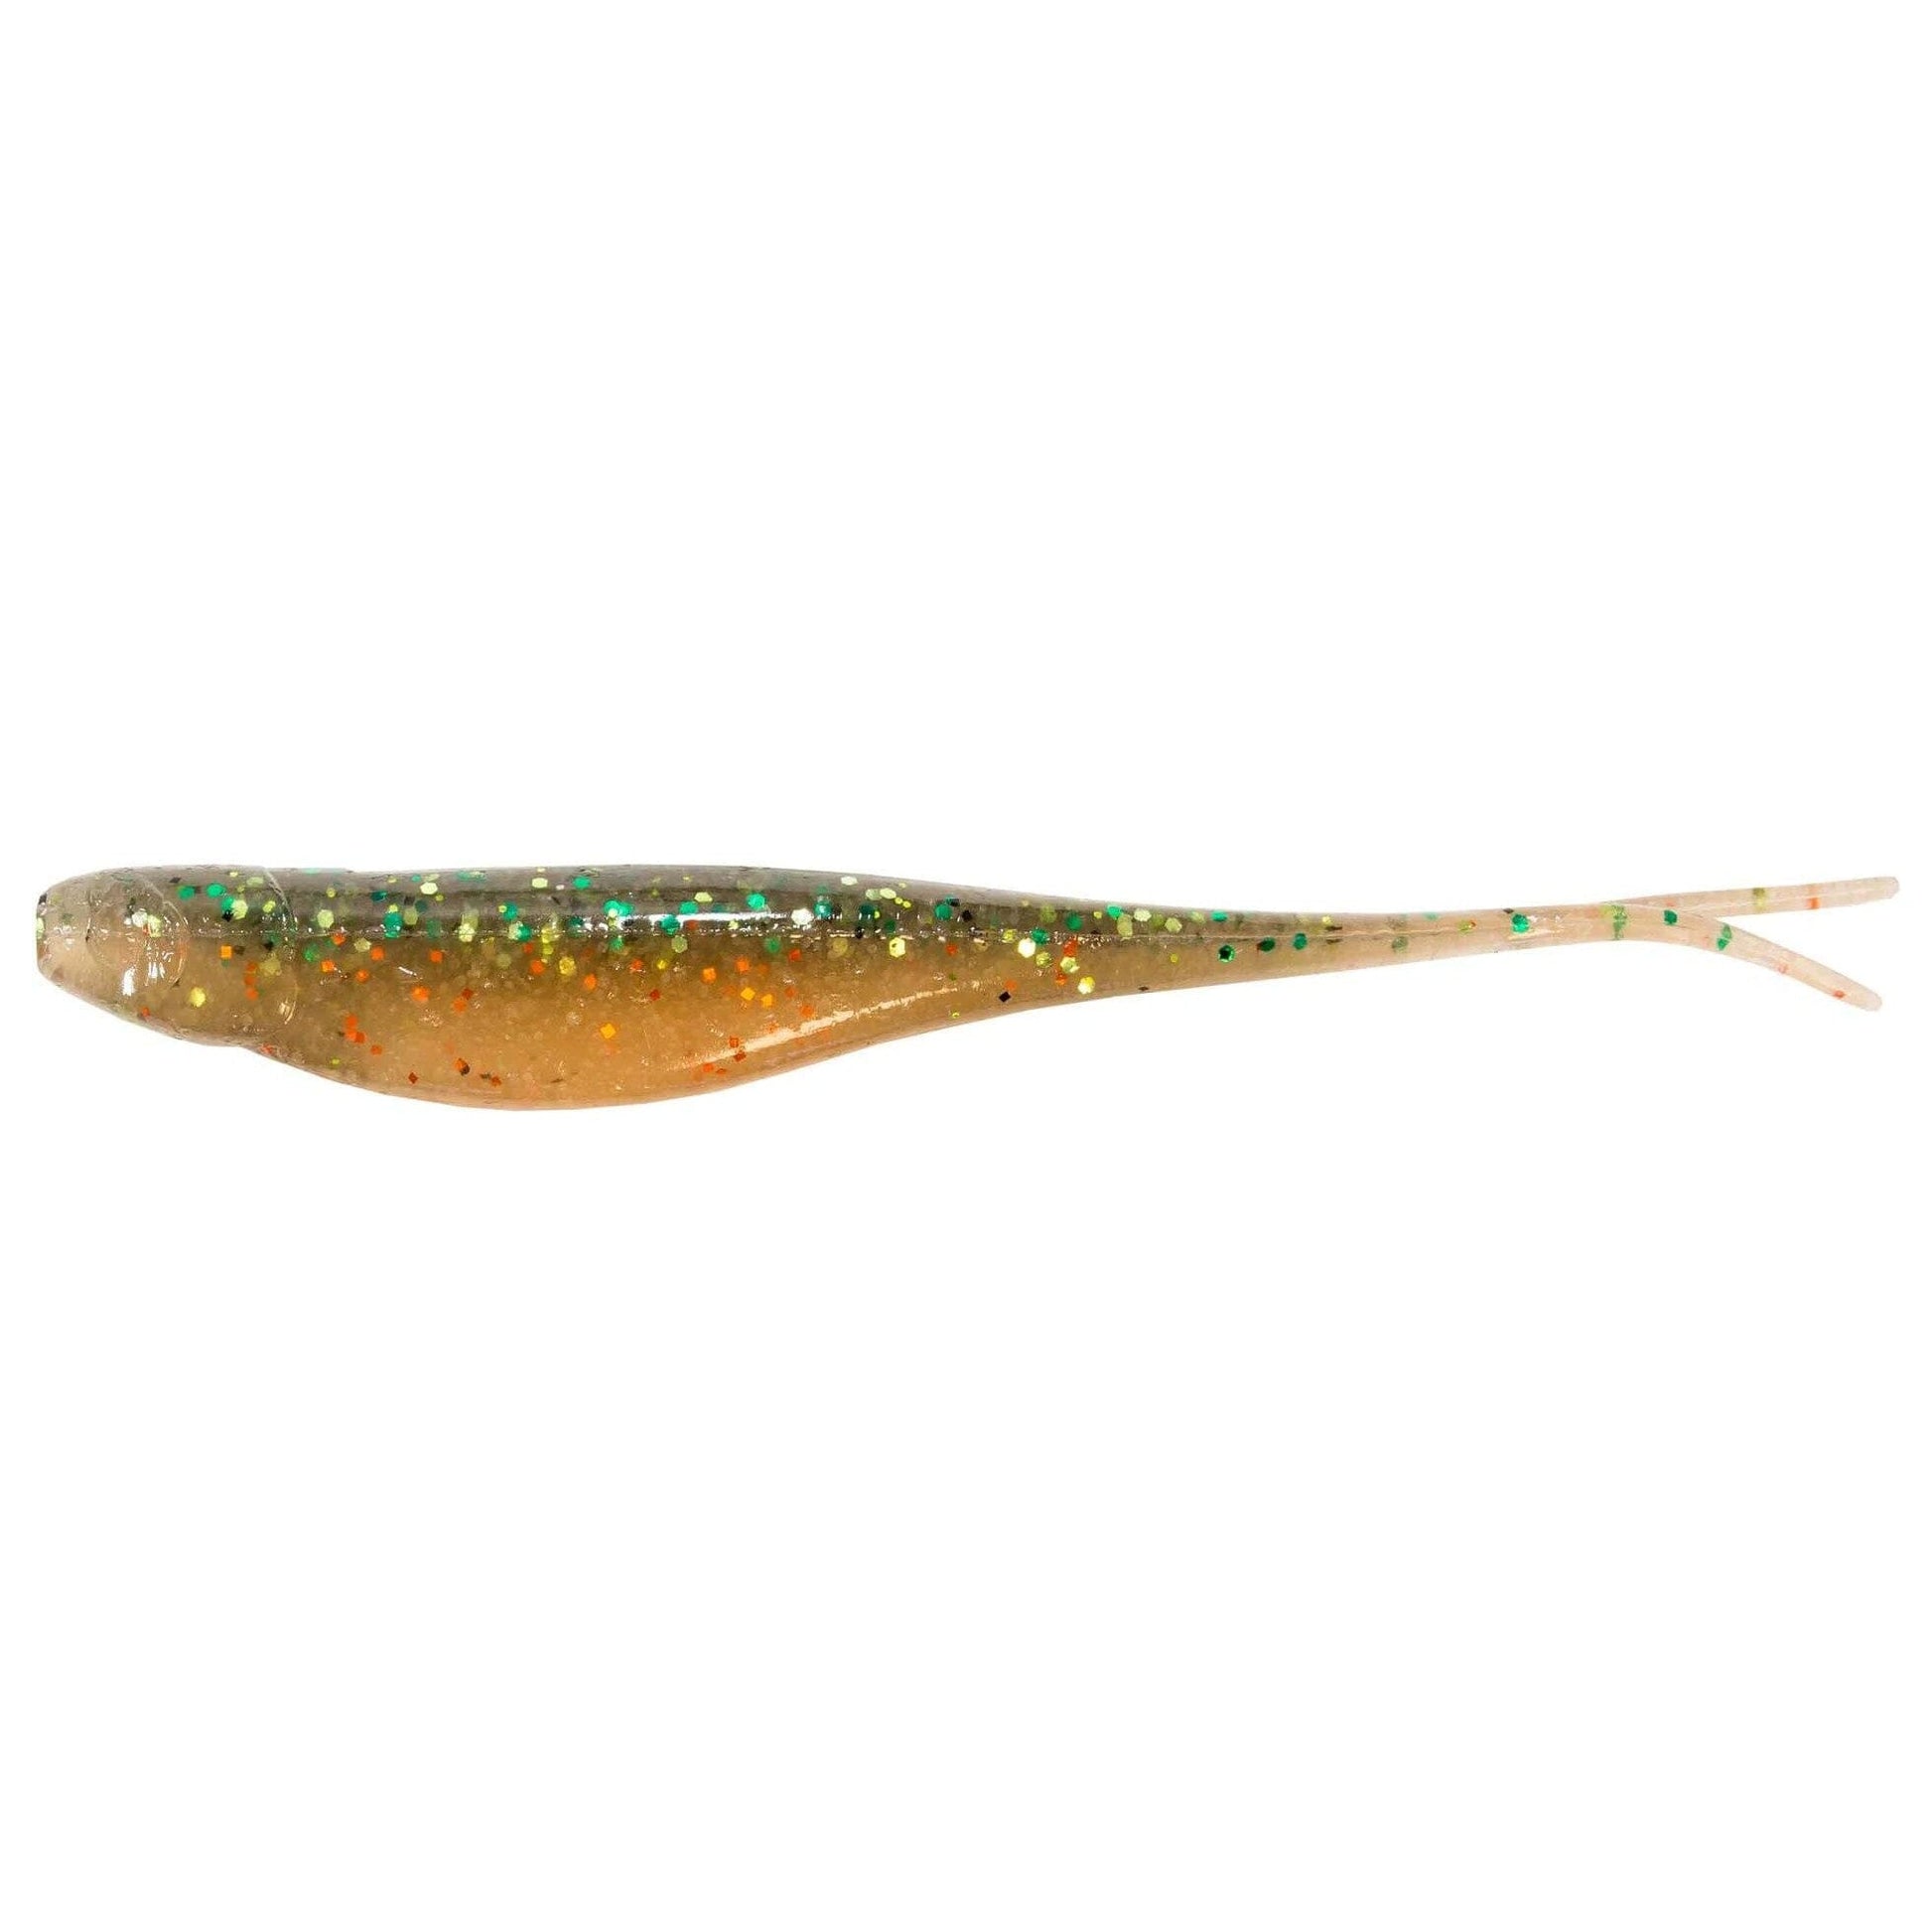 Z-Man Scented Jerk ShadZ - 4in - Perfect Perch